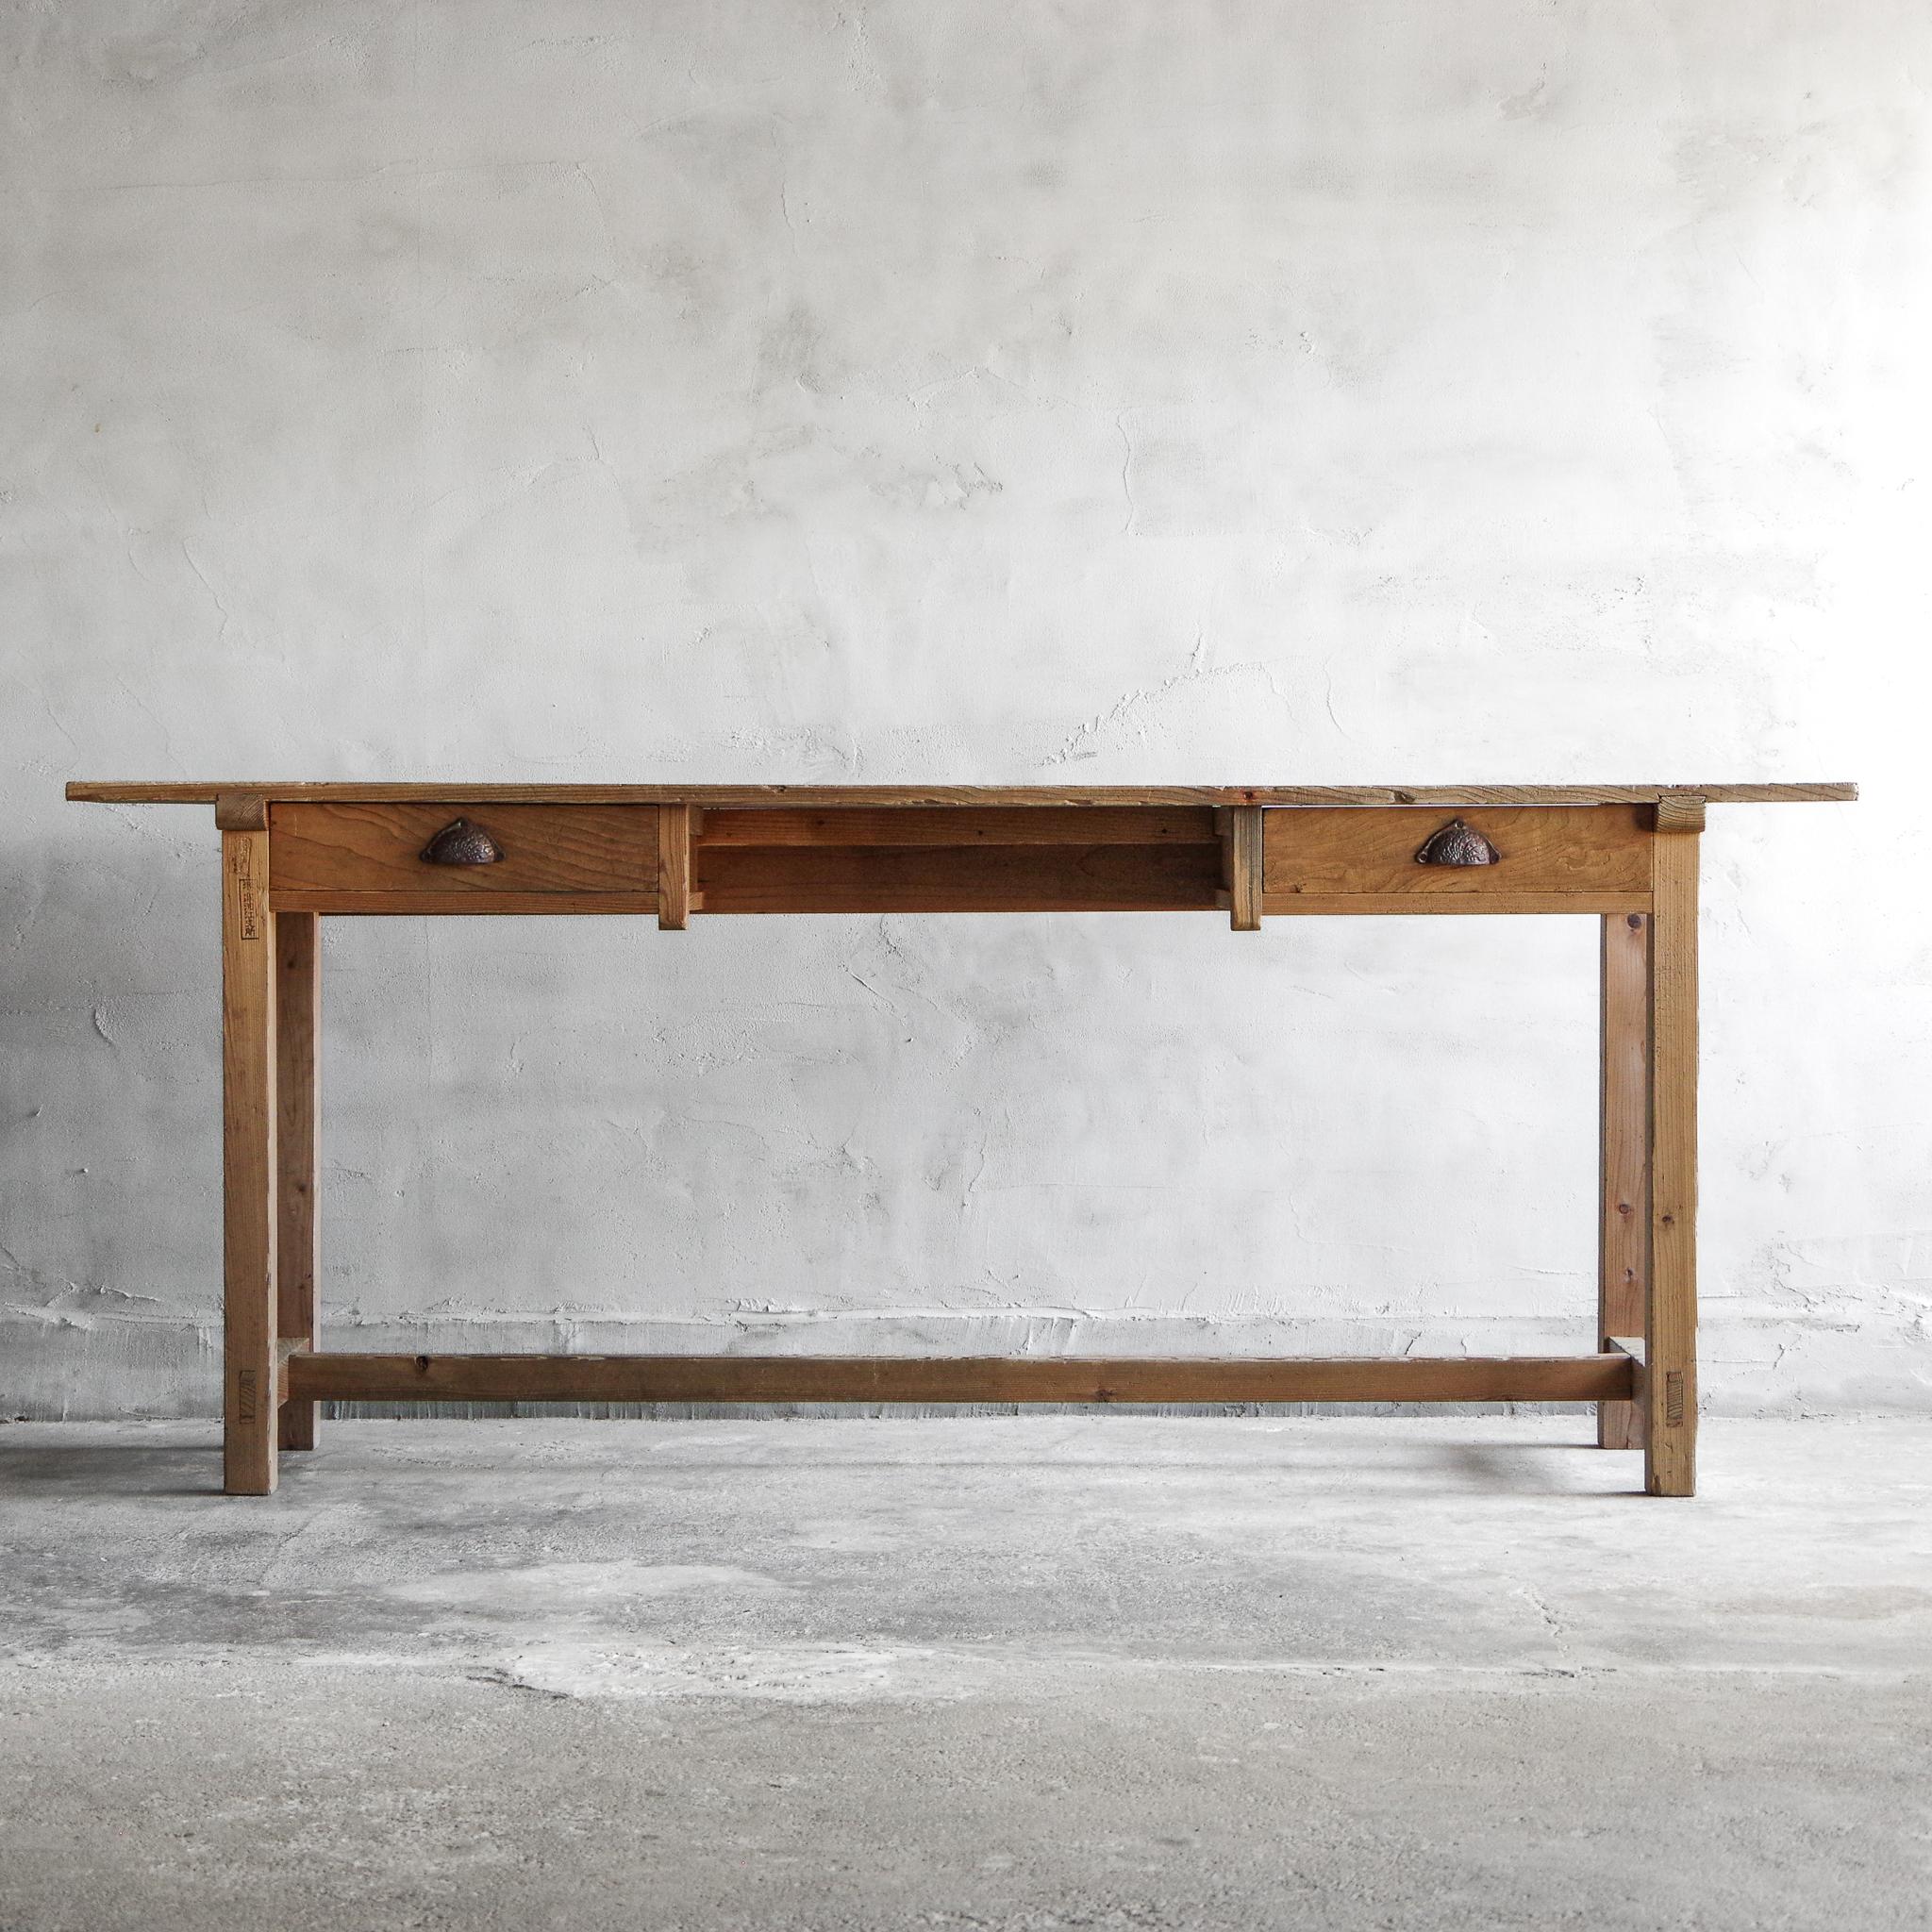 This product is a very old Japanese long desk, blending distinctive design with functional beauty. 
The drawers on each side render this desk a unique and rare find. Made from Japanese cedar, a modest and popular wood, the desk exudes warmth and has